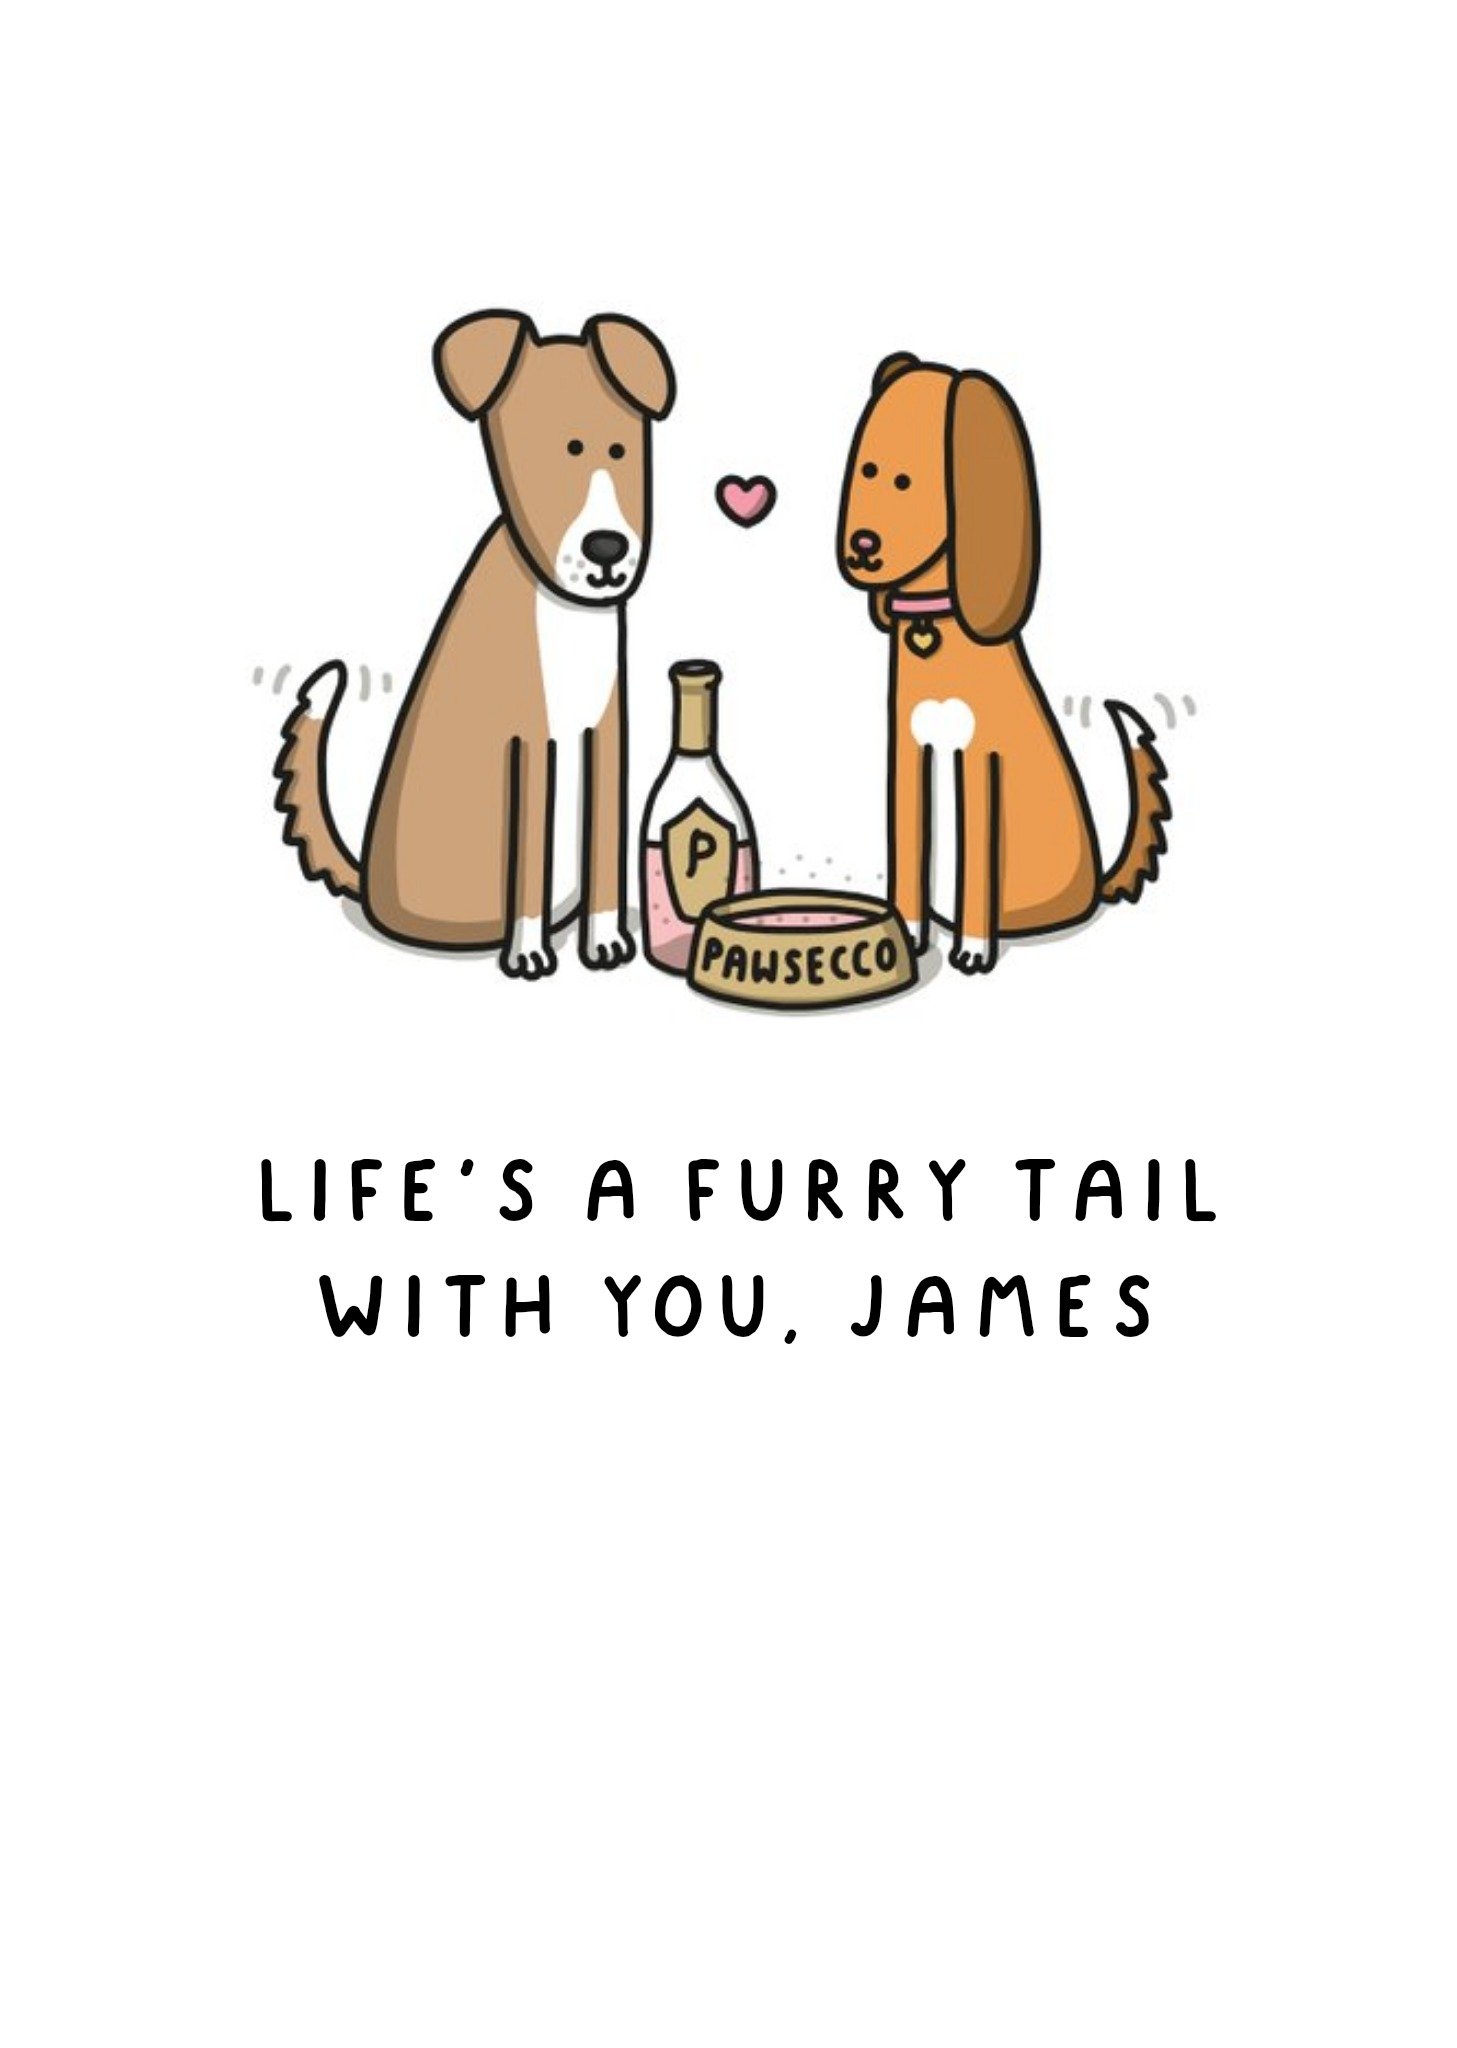 Love Hearts Rich T Mungo And Shoddy Illustrated Dogs Cute Valentine's Card Ecard